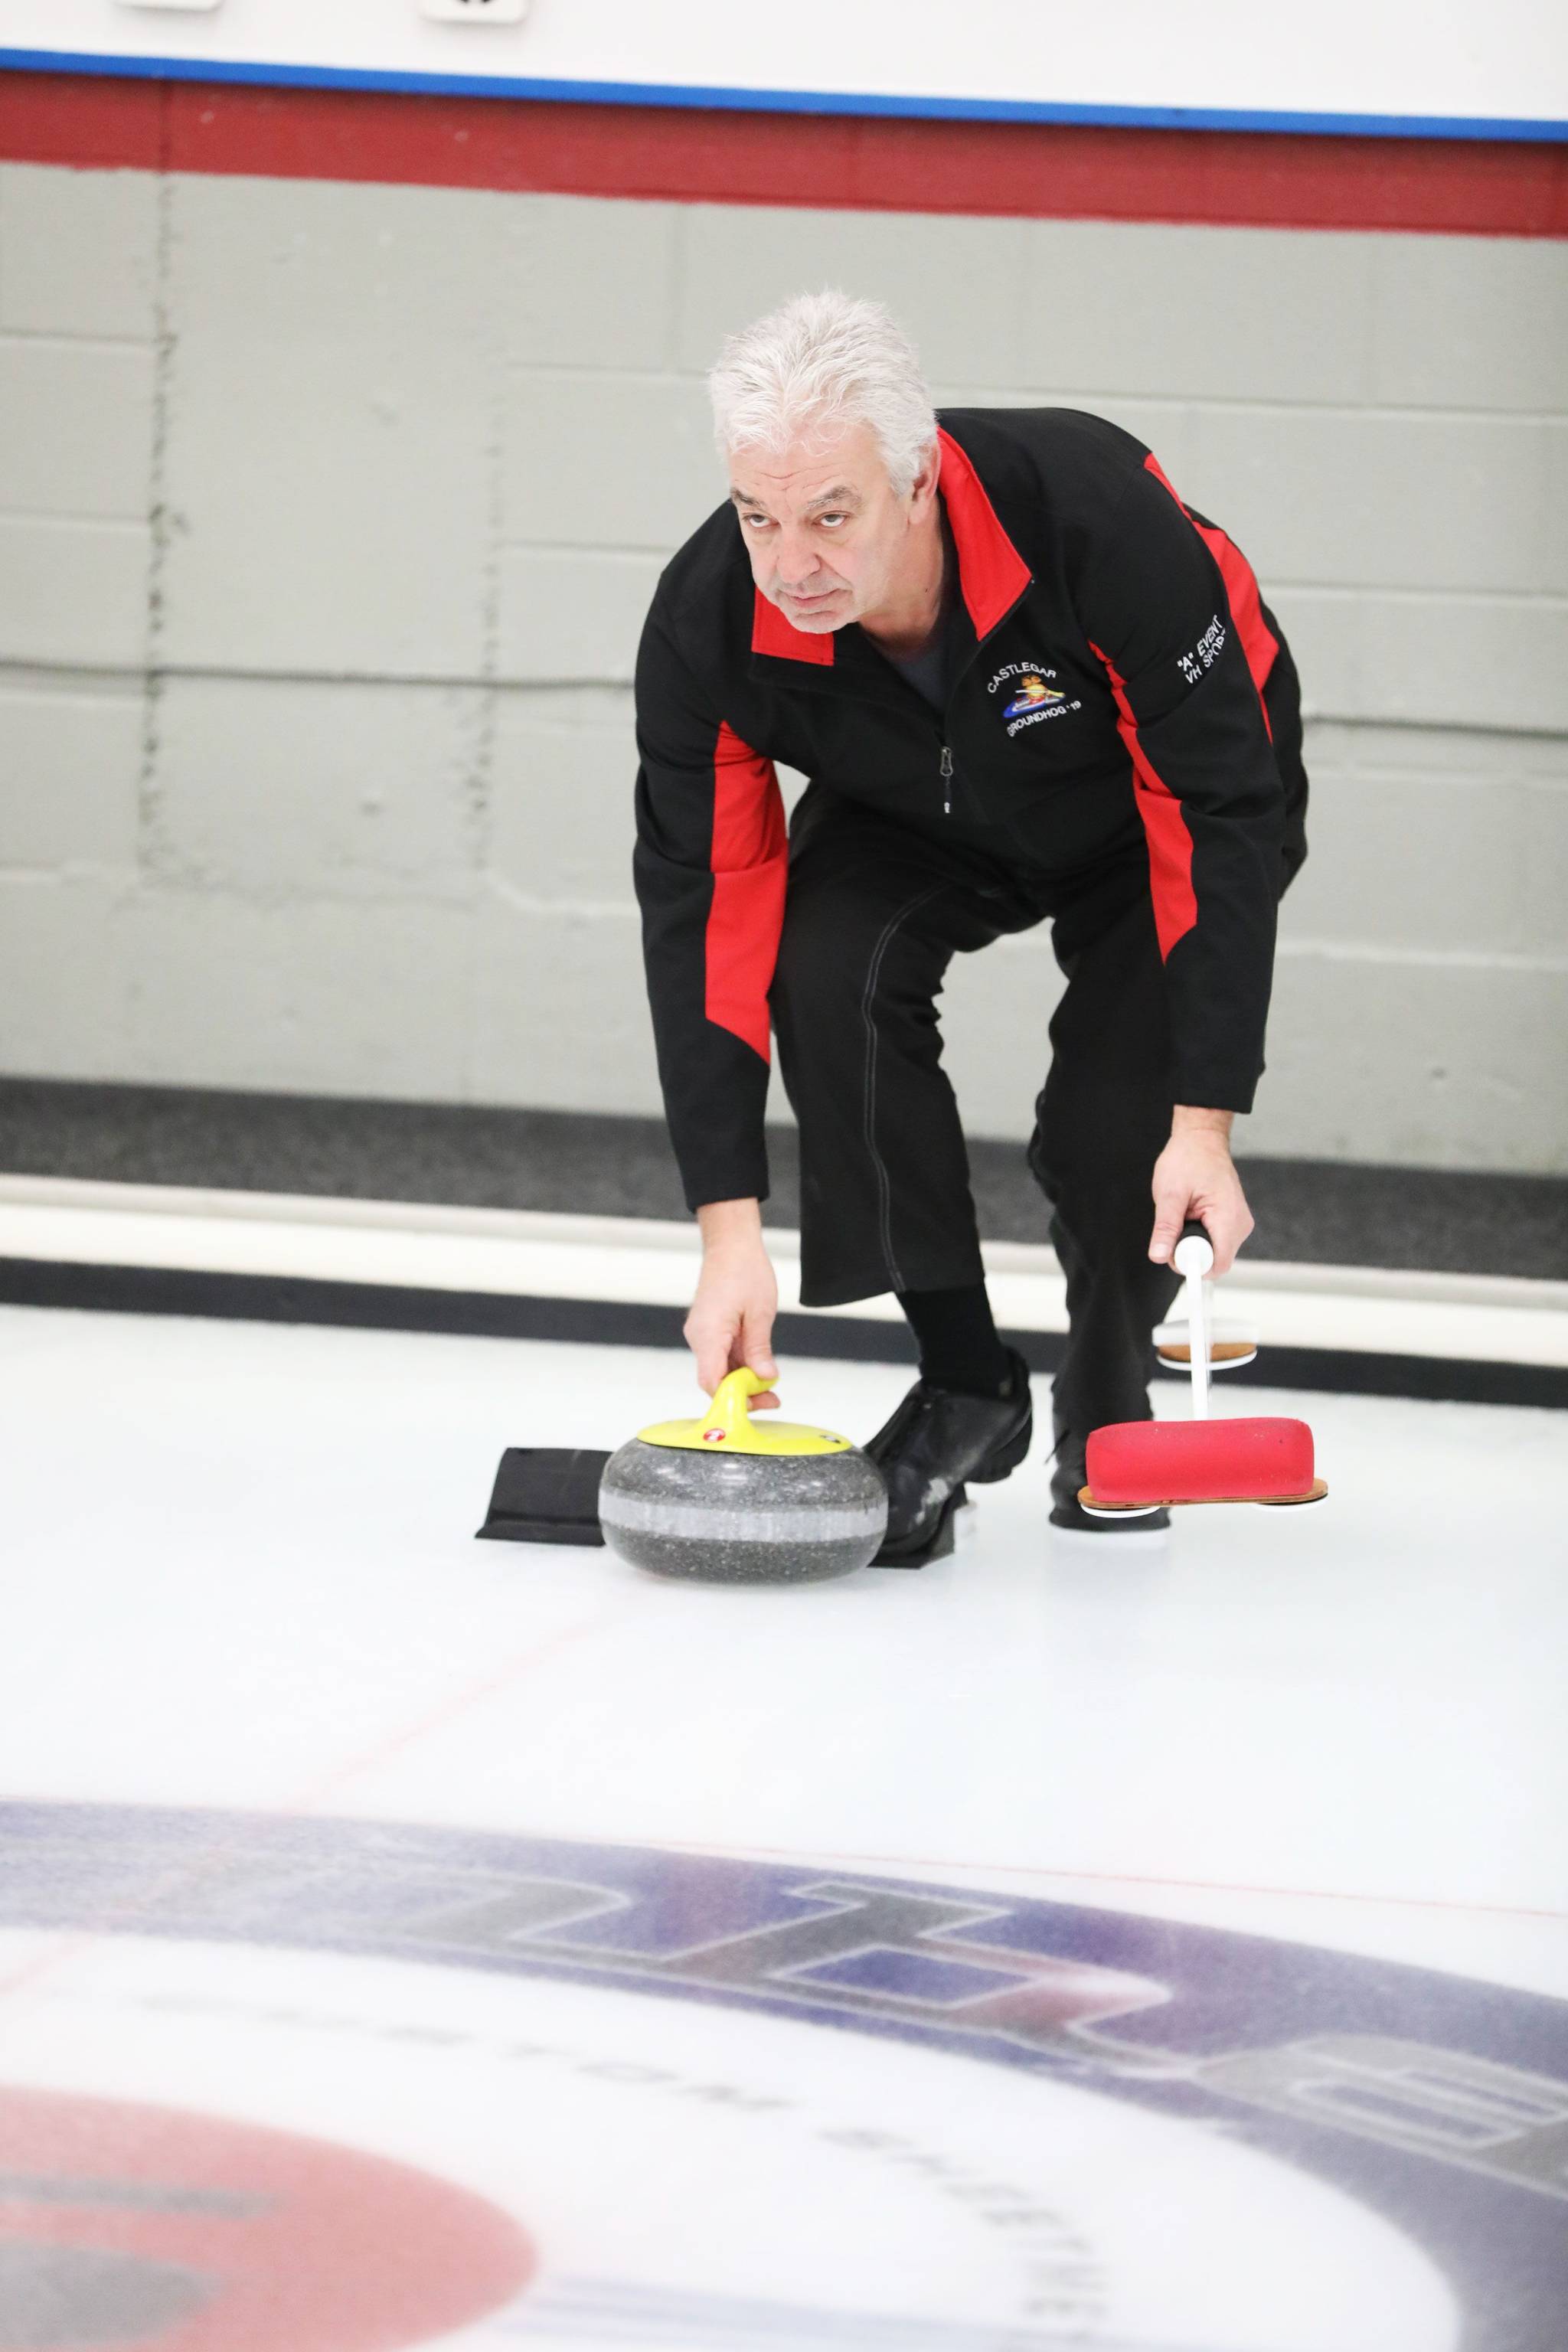 20225956_web1_200123-CAN-Curling_4